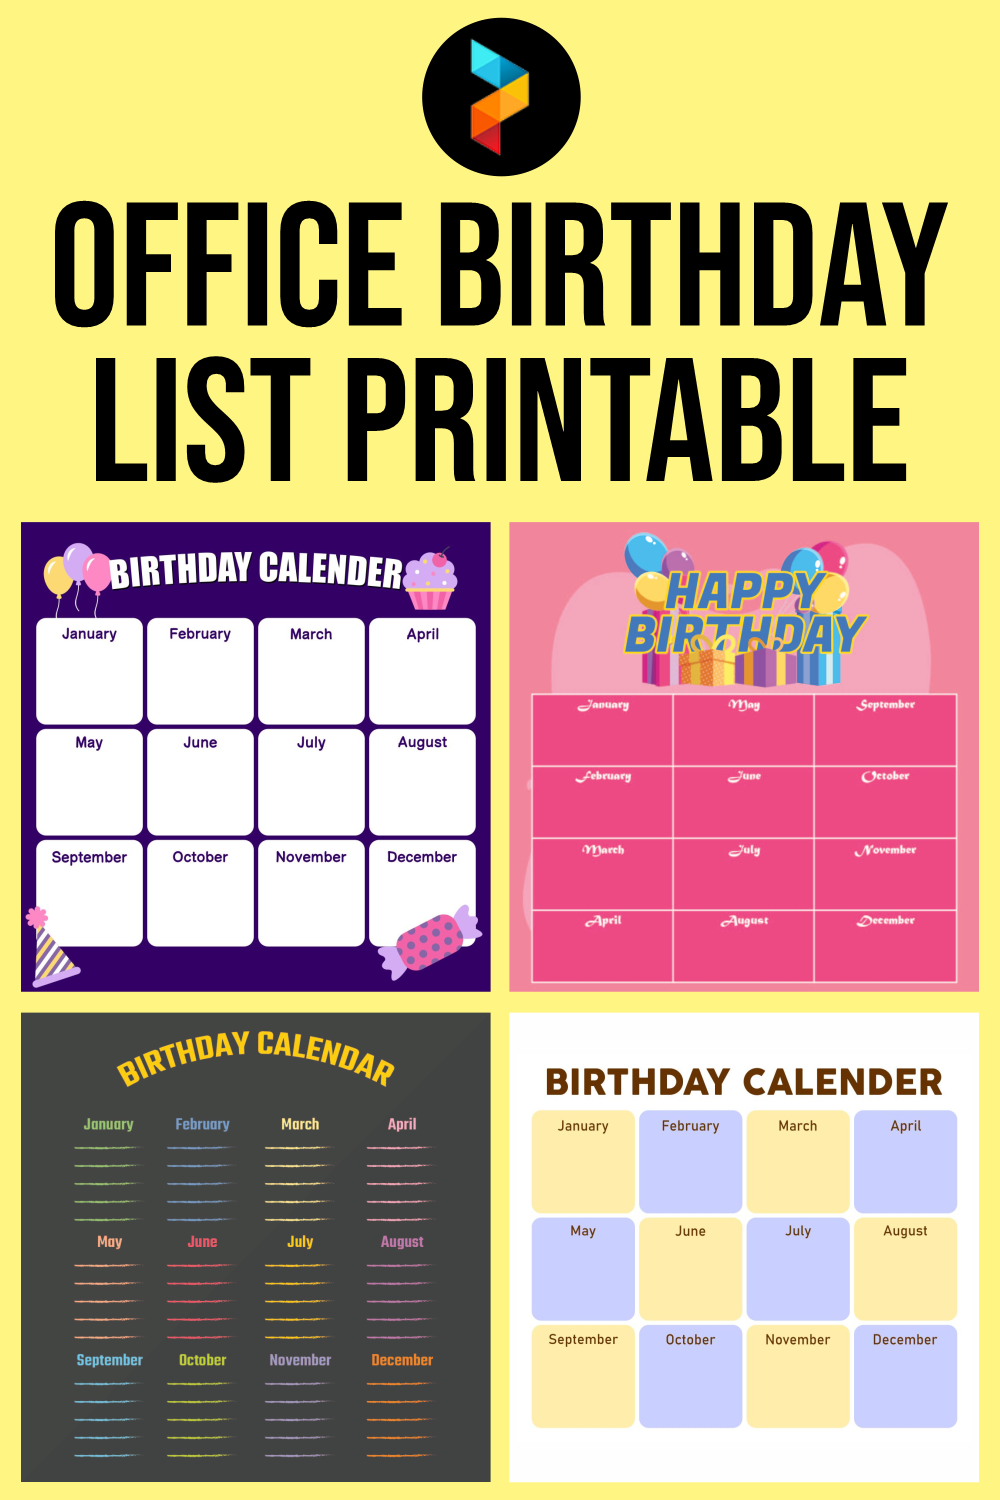 free birthday calendar for the workplace 2